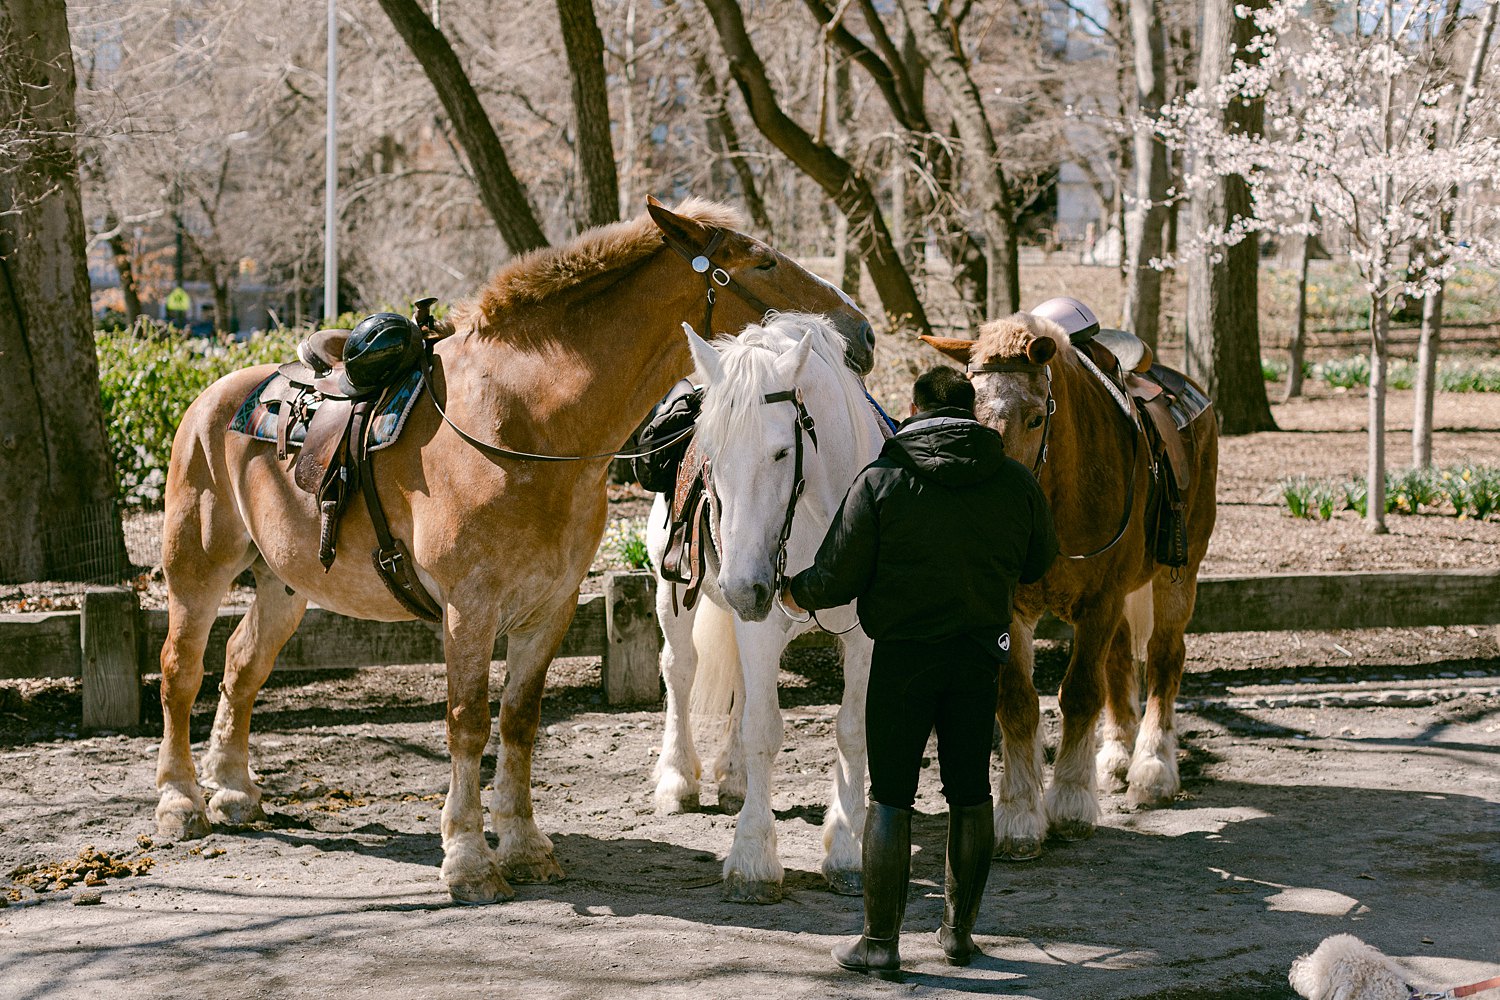 Horses in central Park NYC with man in all black